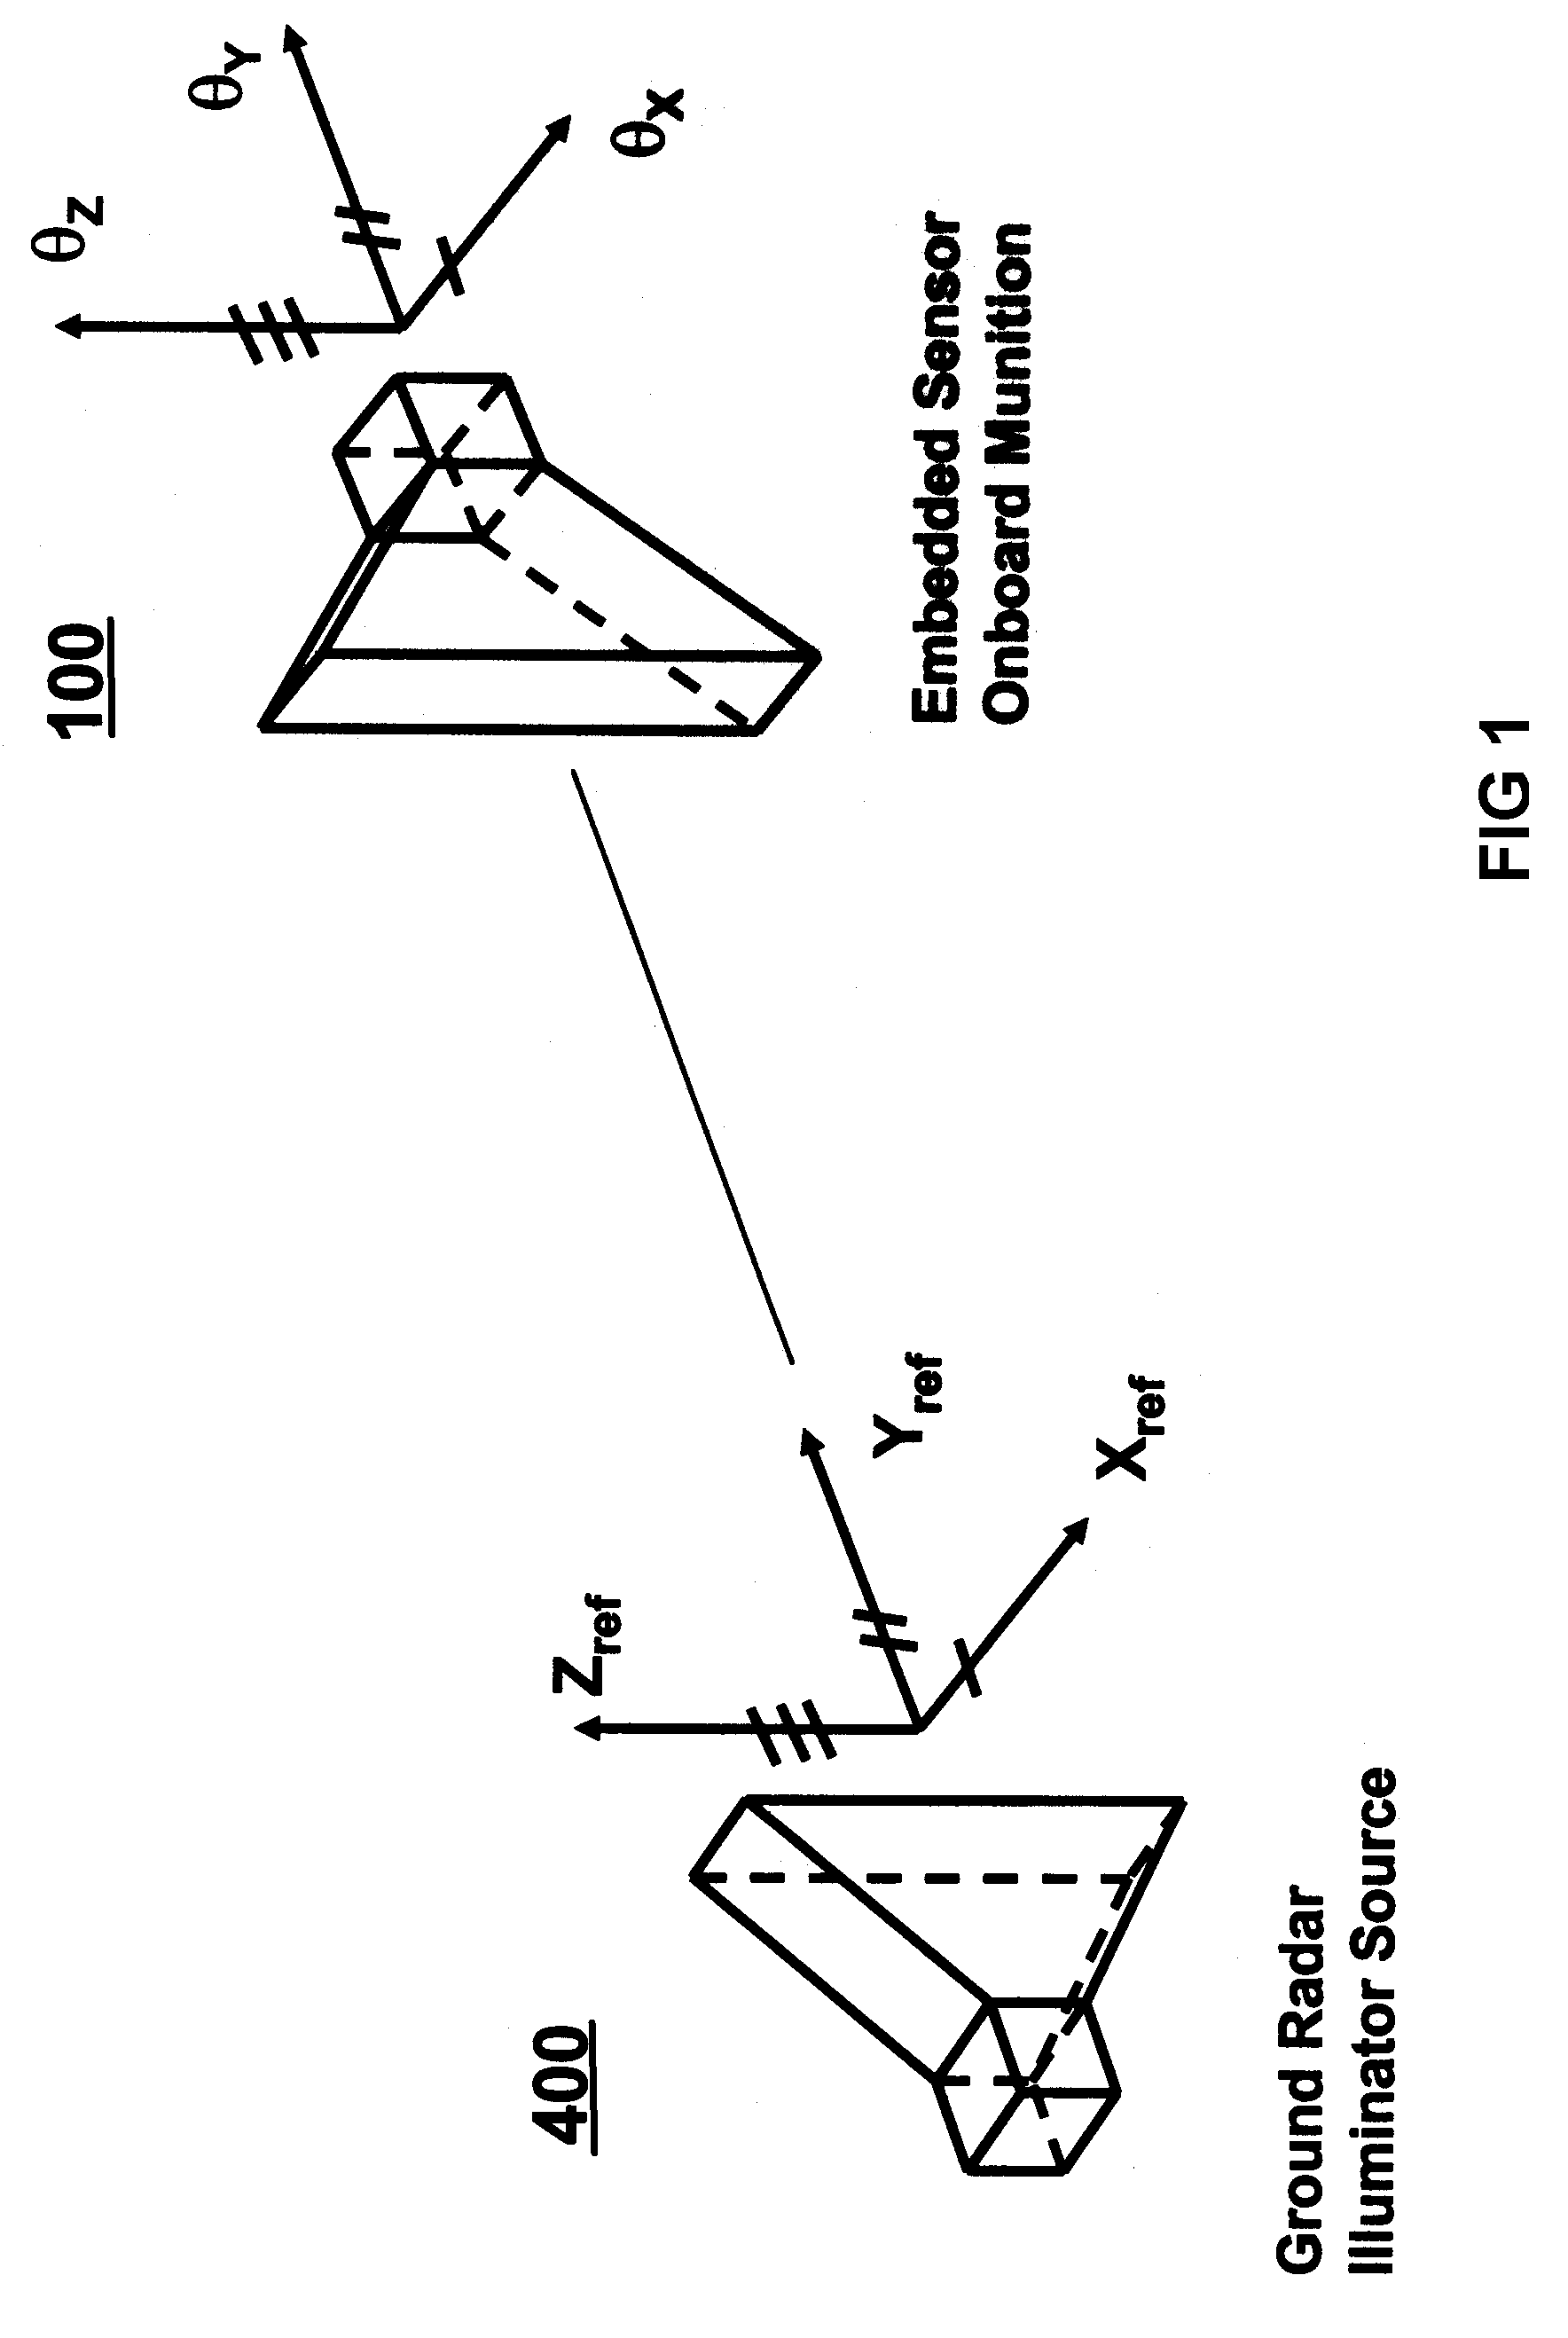 System and method for the measurement of full relative position and orientation of objects